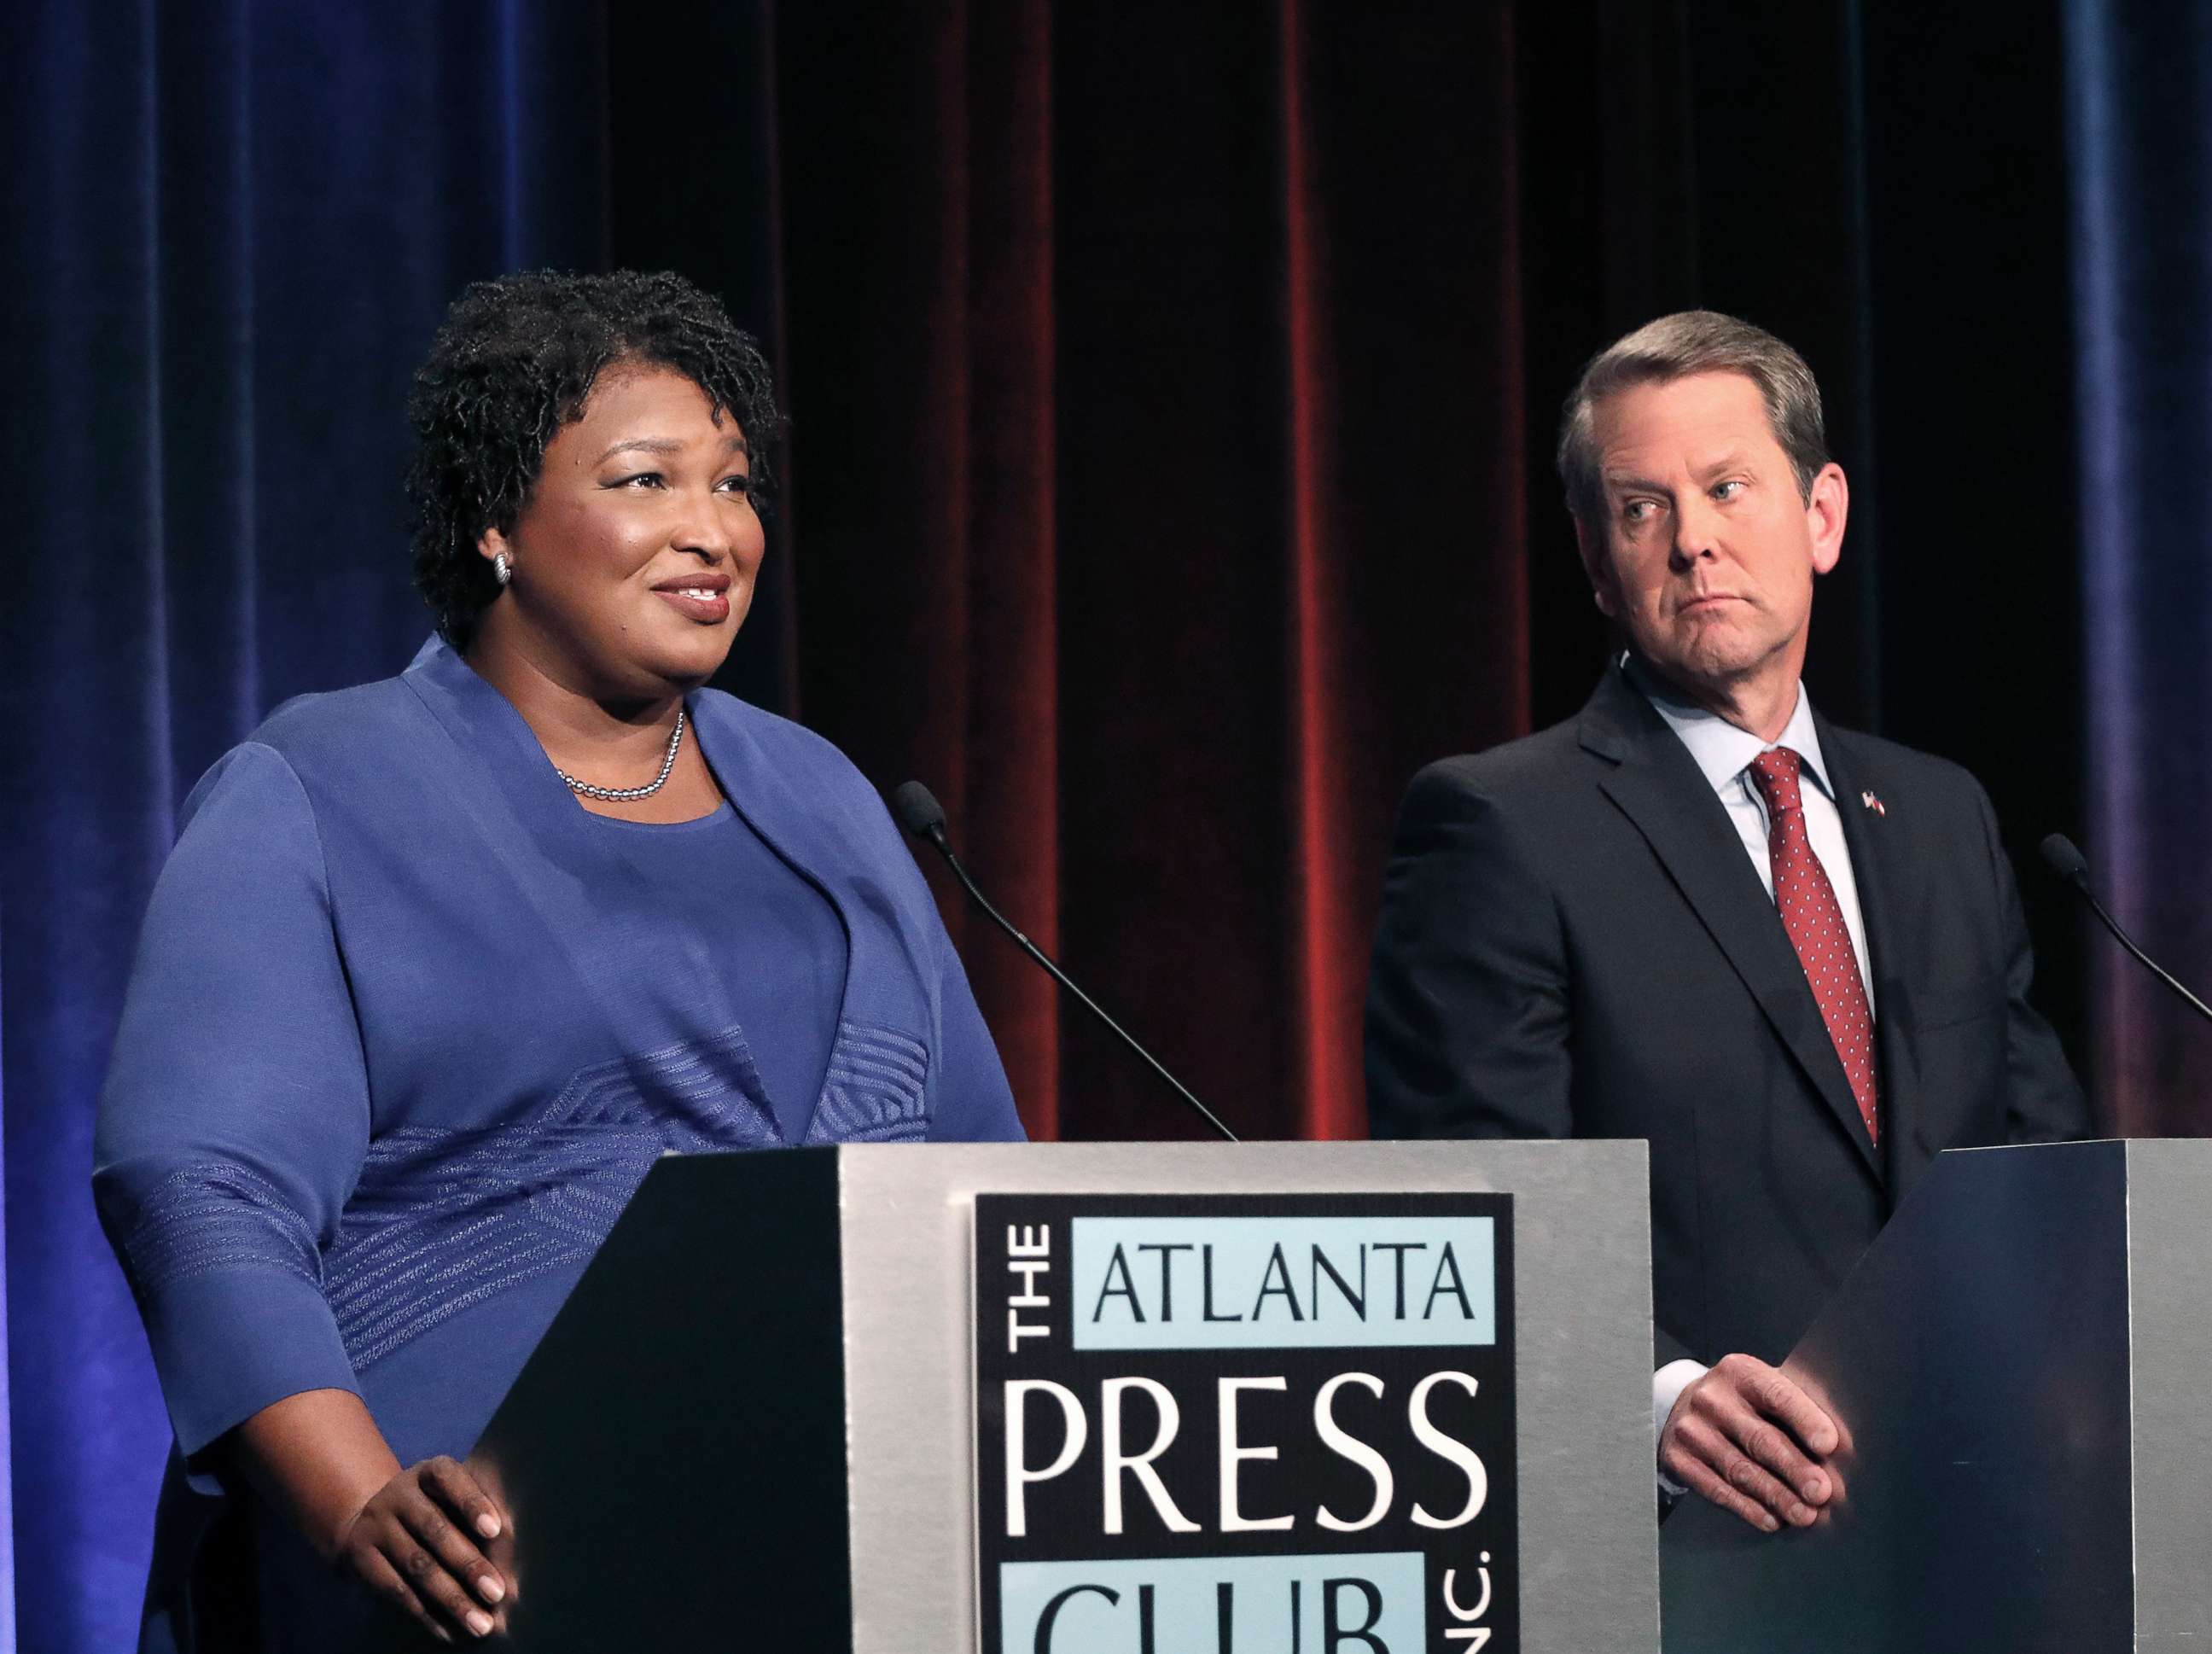 PHOTO: Democratic gubernatorial candidate for Georgia Stacey Abrams, left, speaks as her Republican opponent Secretary of State Brian Kemp listens during a debate in Atlanta, Oct. 23, 2018.